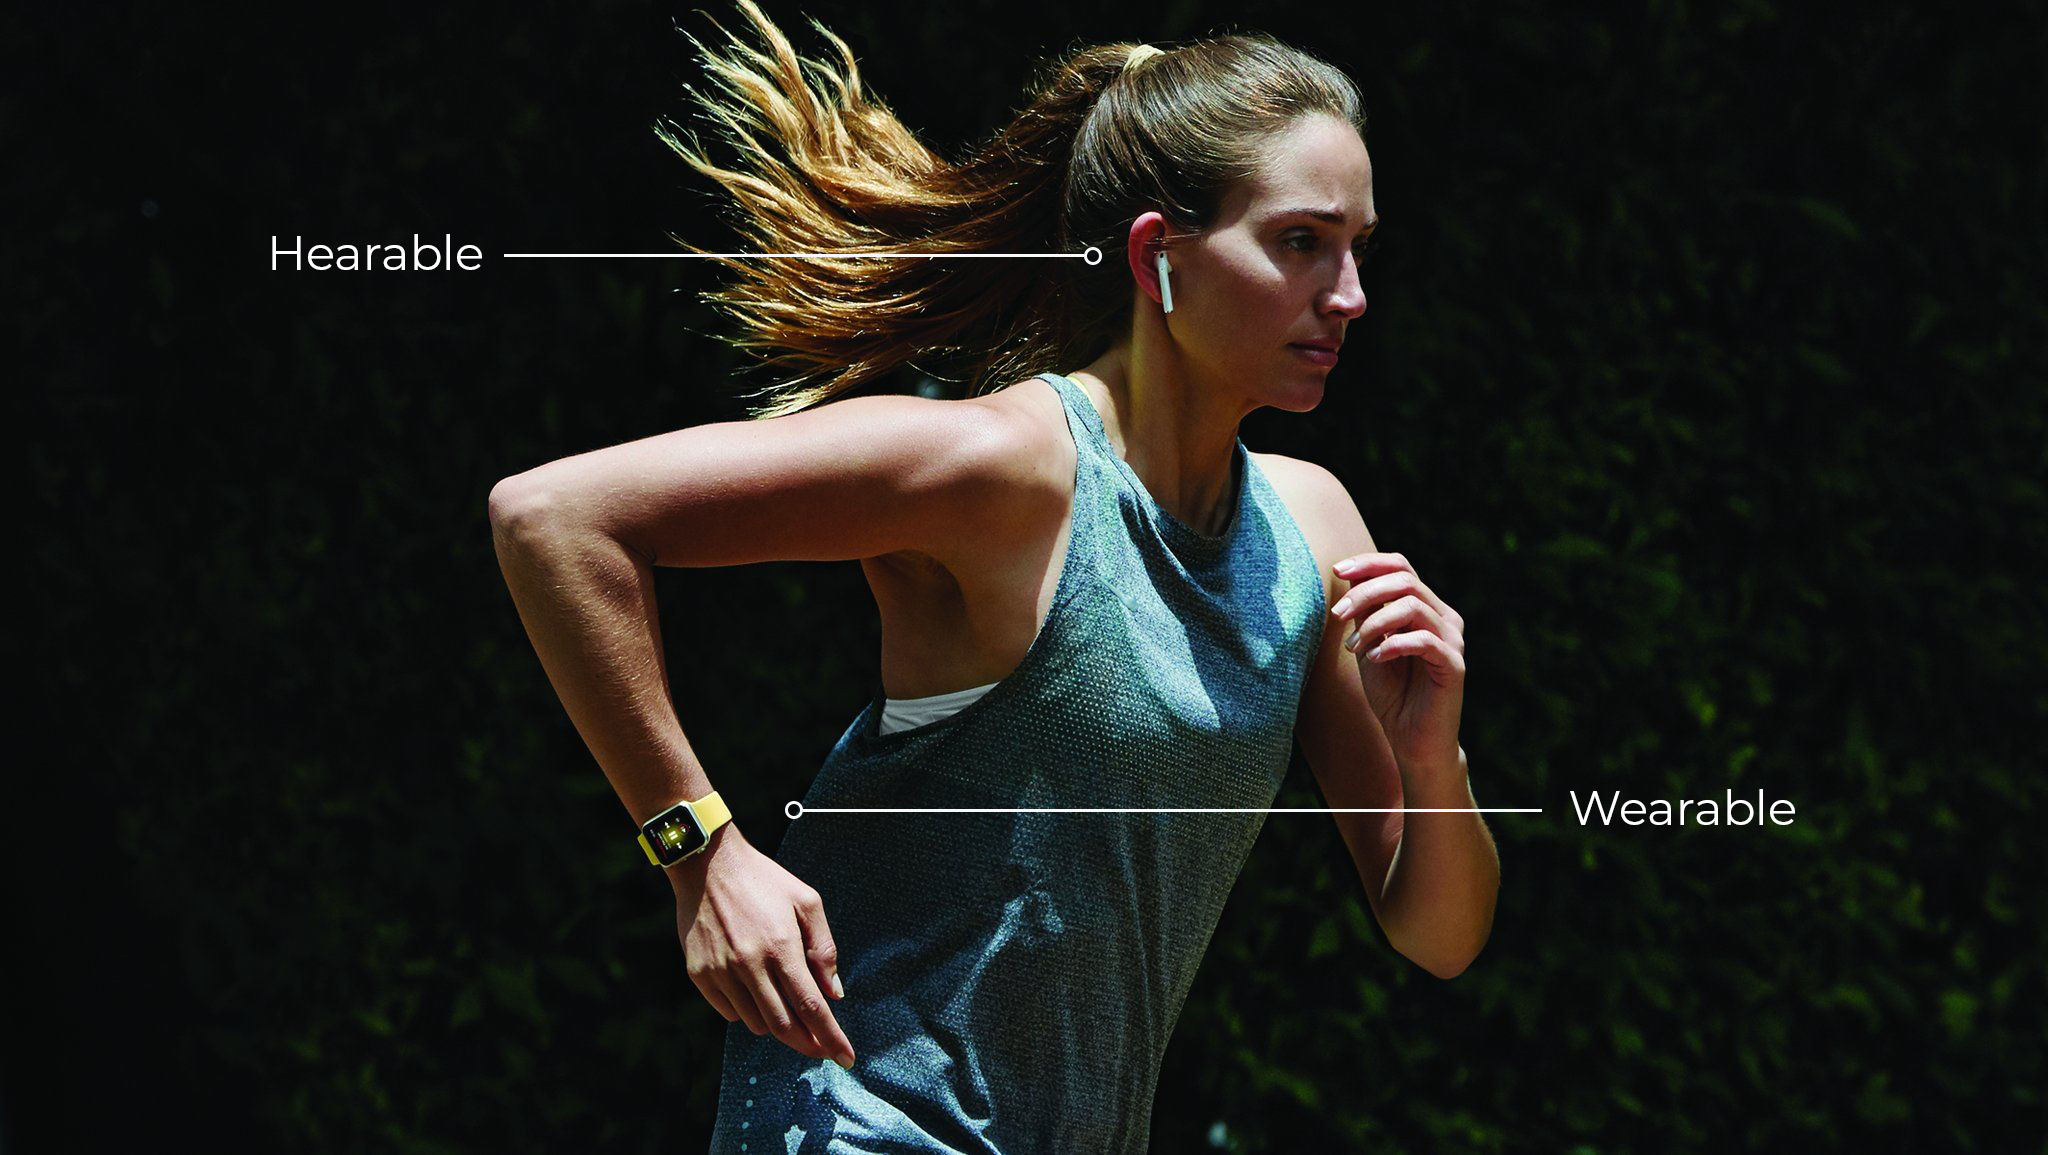 A woman jogs wearing hearables and wearables. 